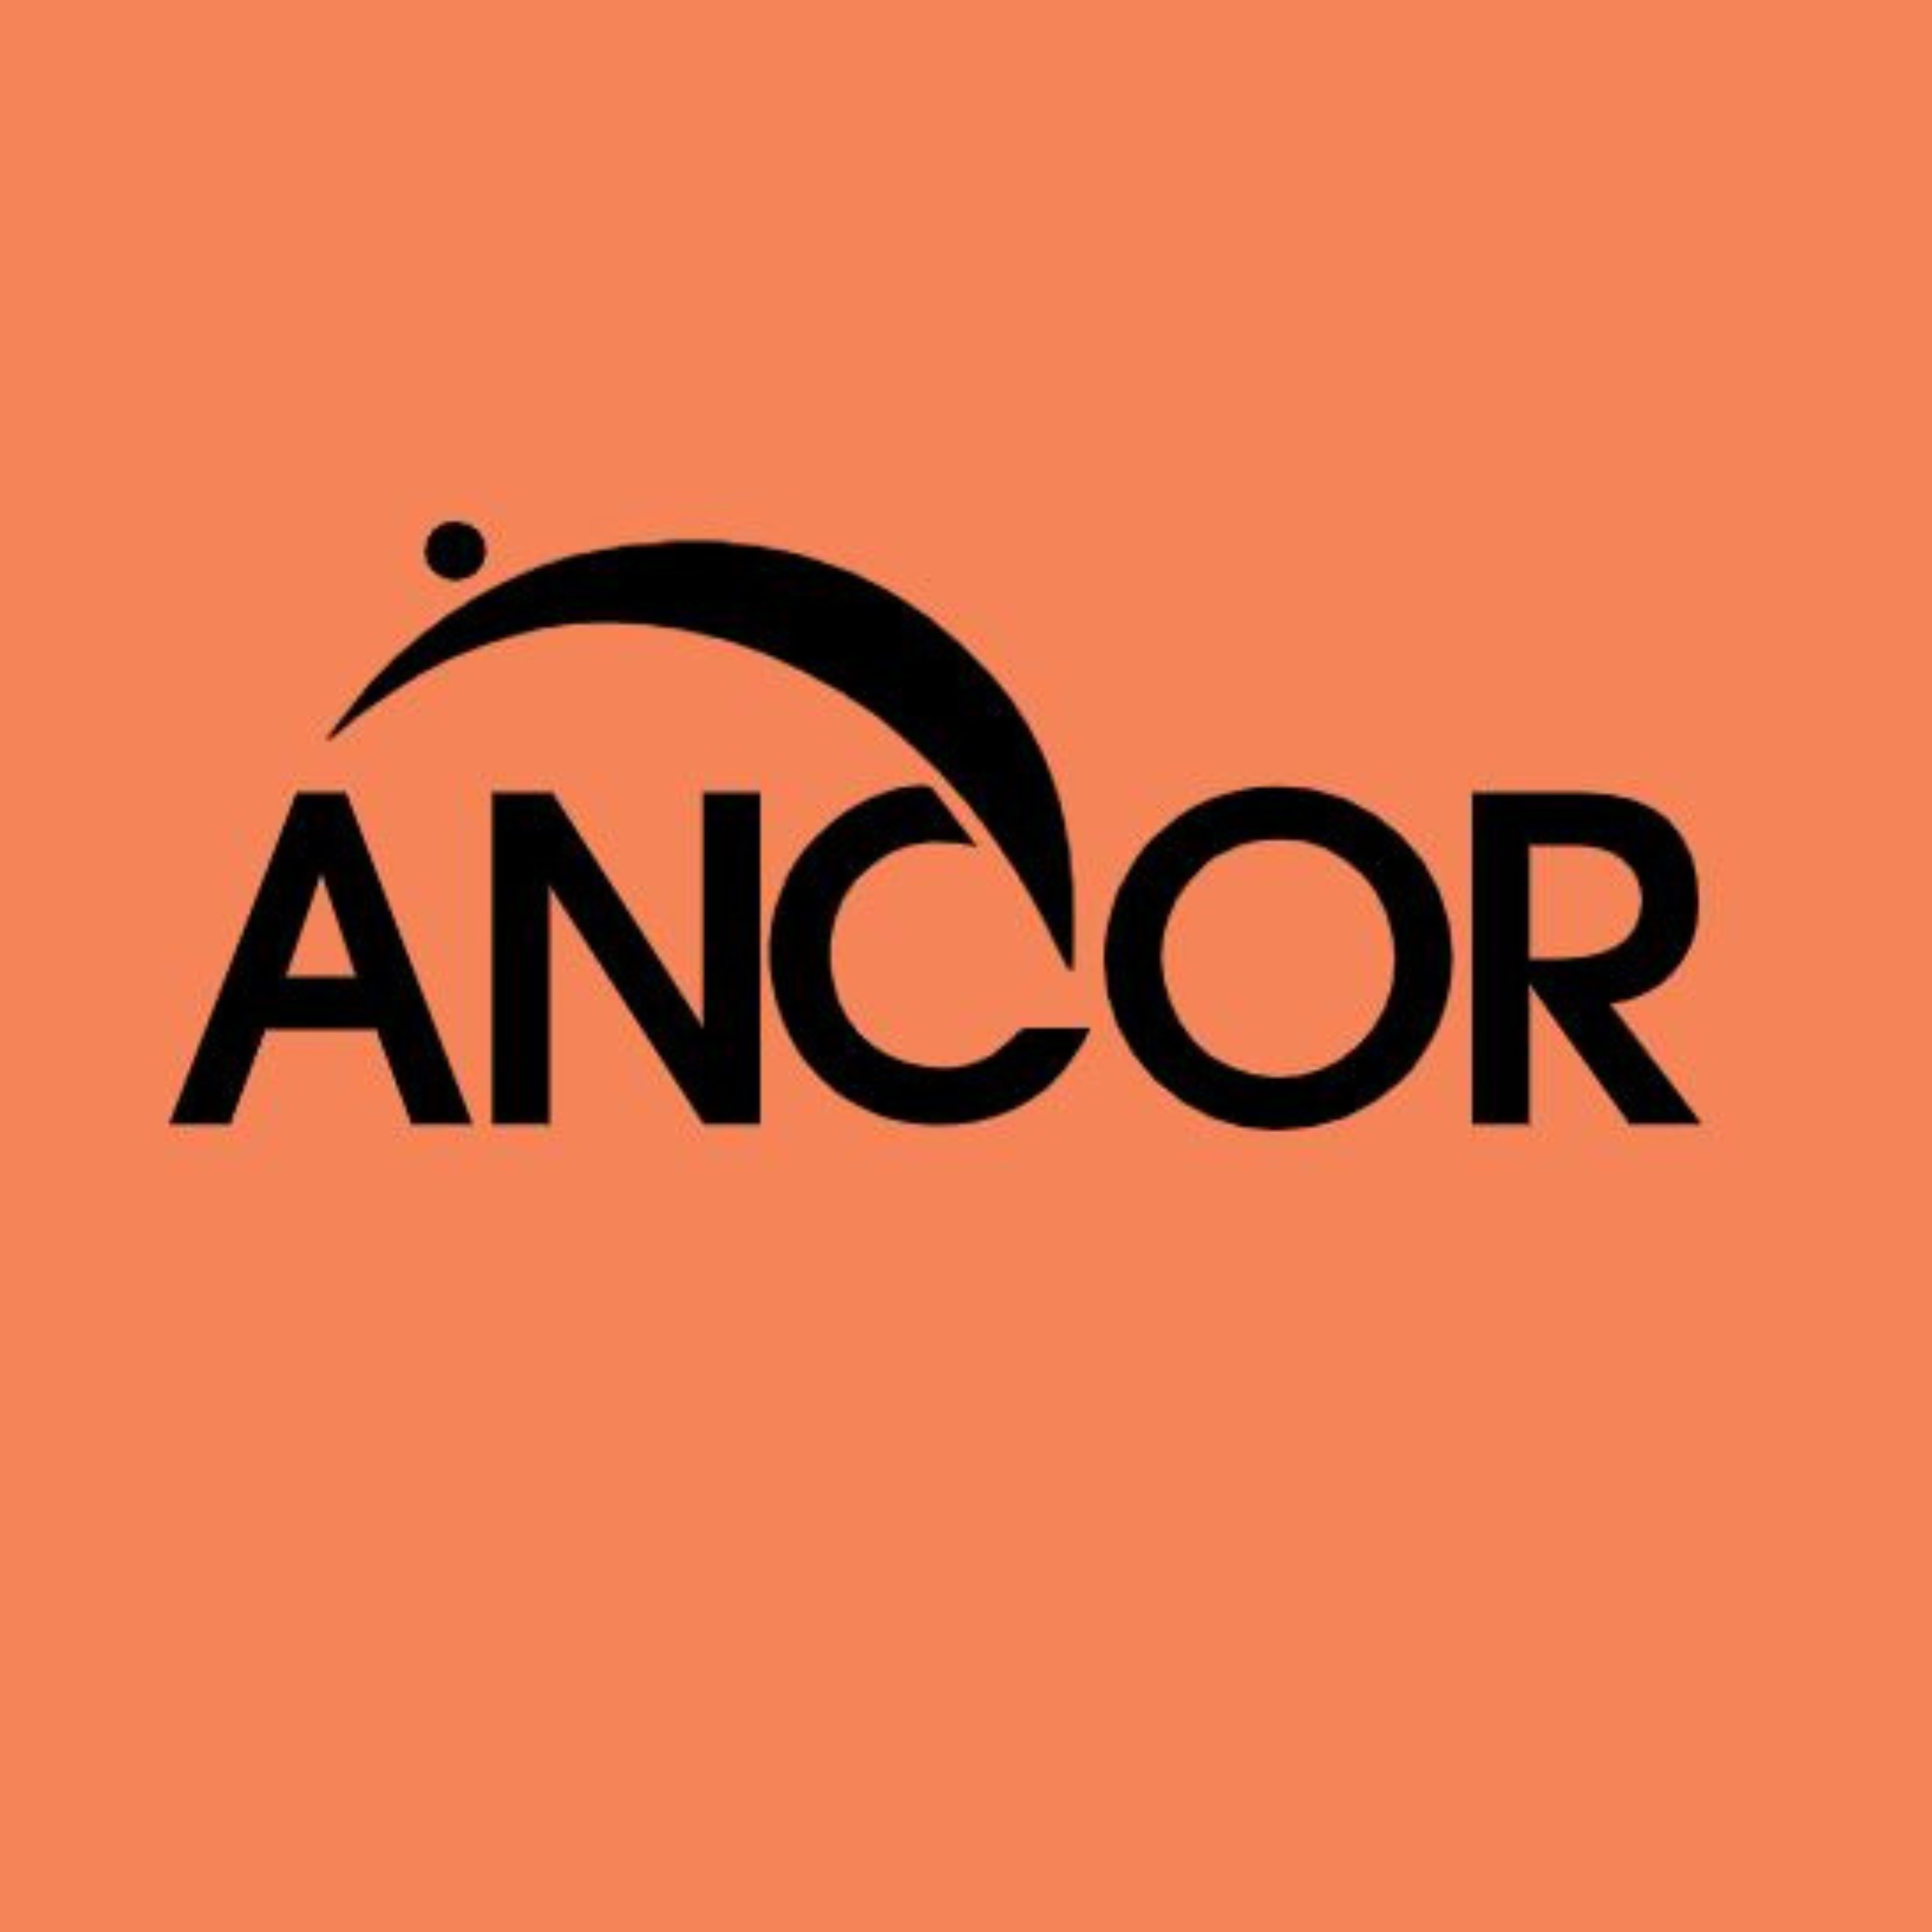 Black ANCOR text with peach-colored background